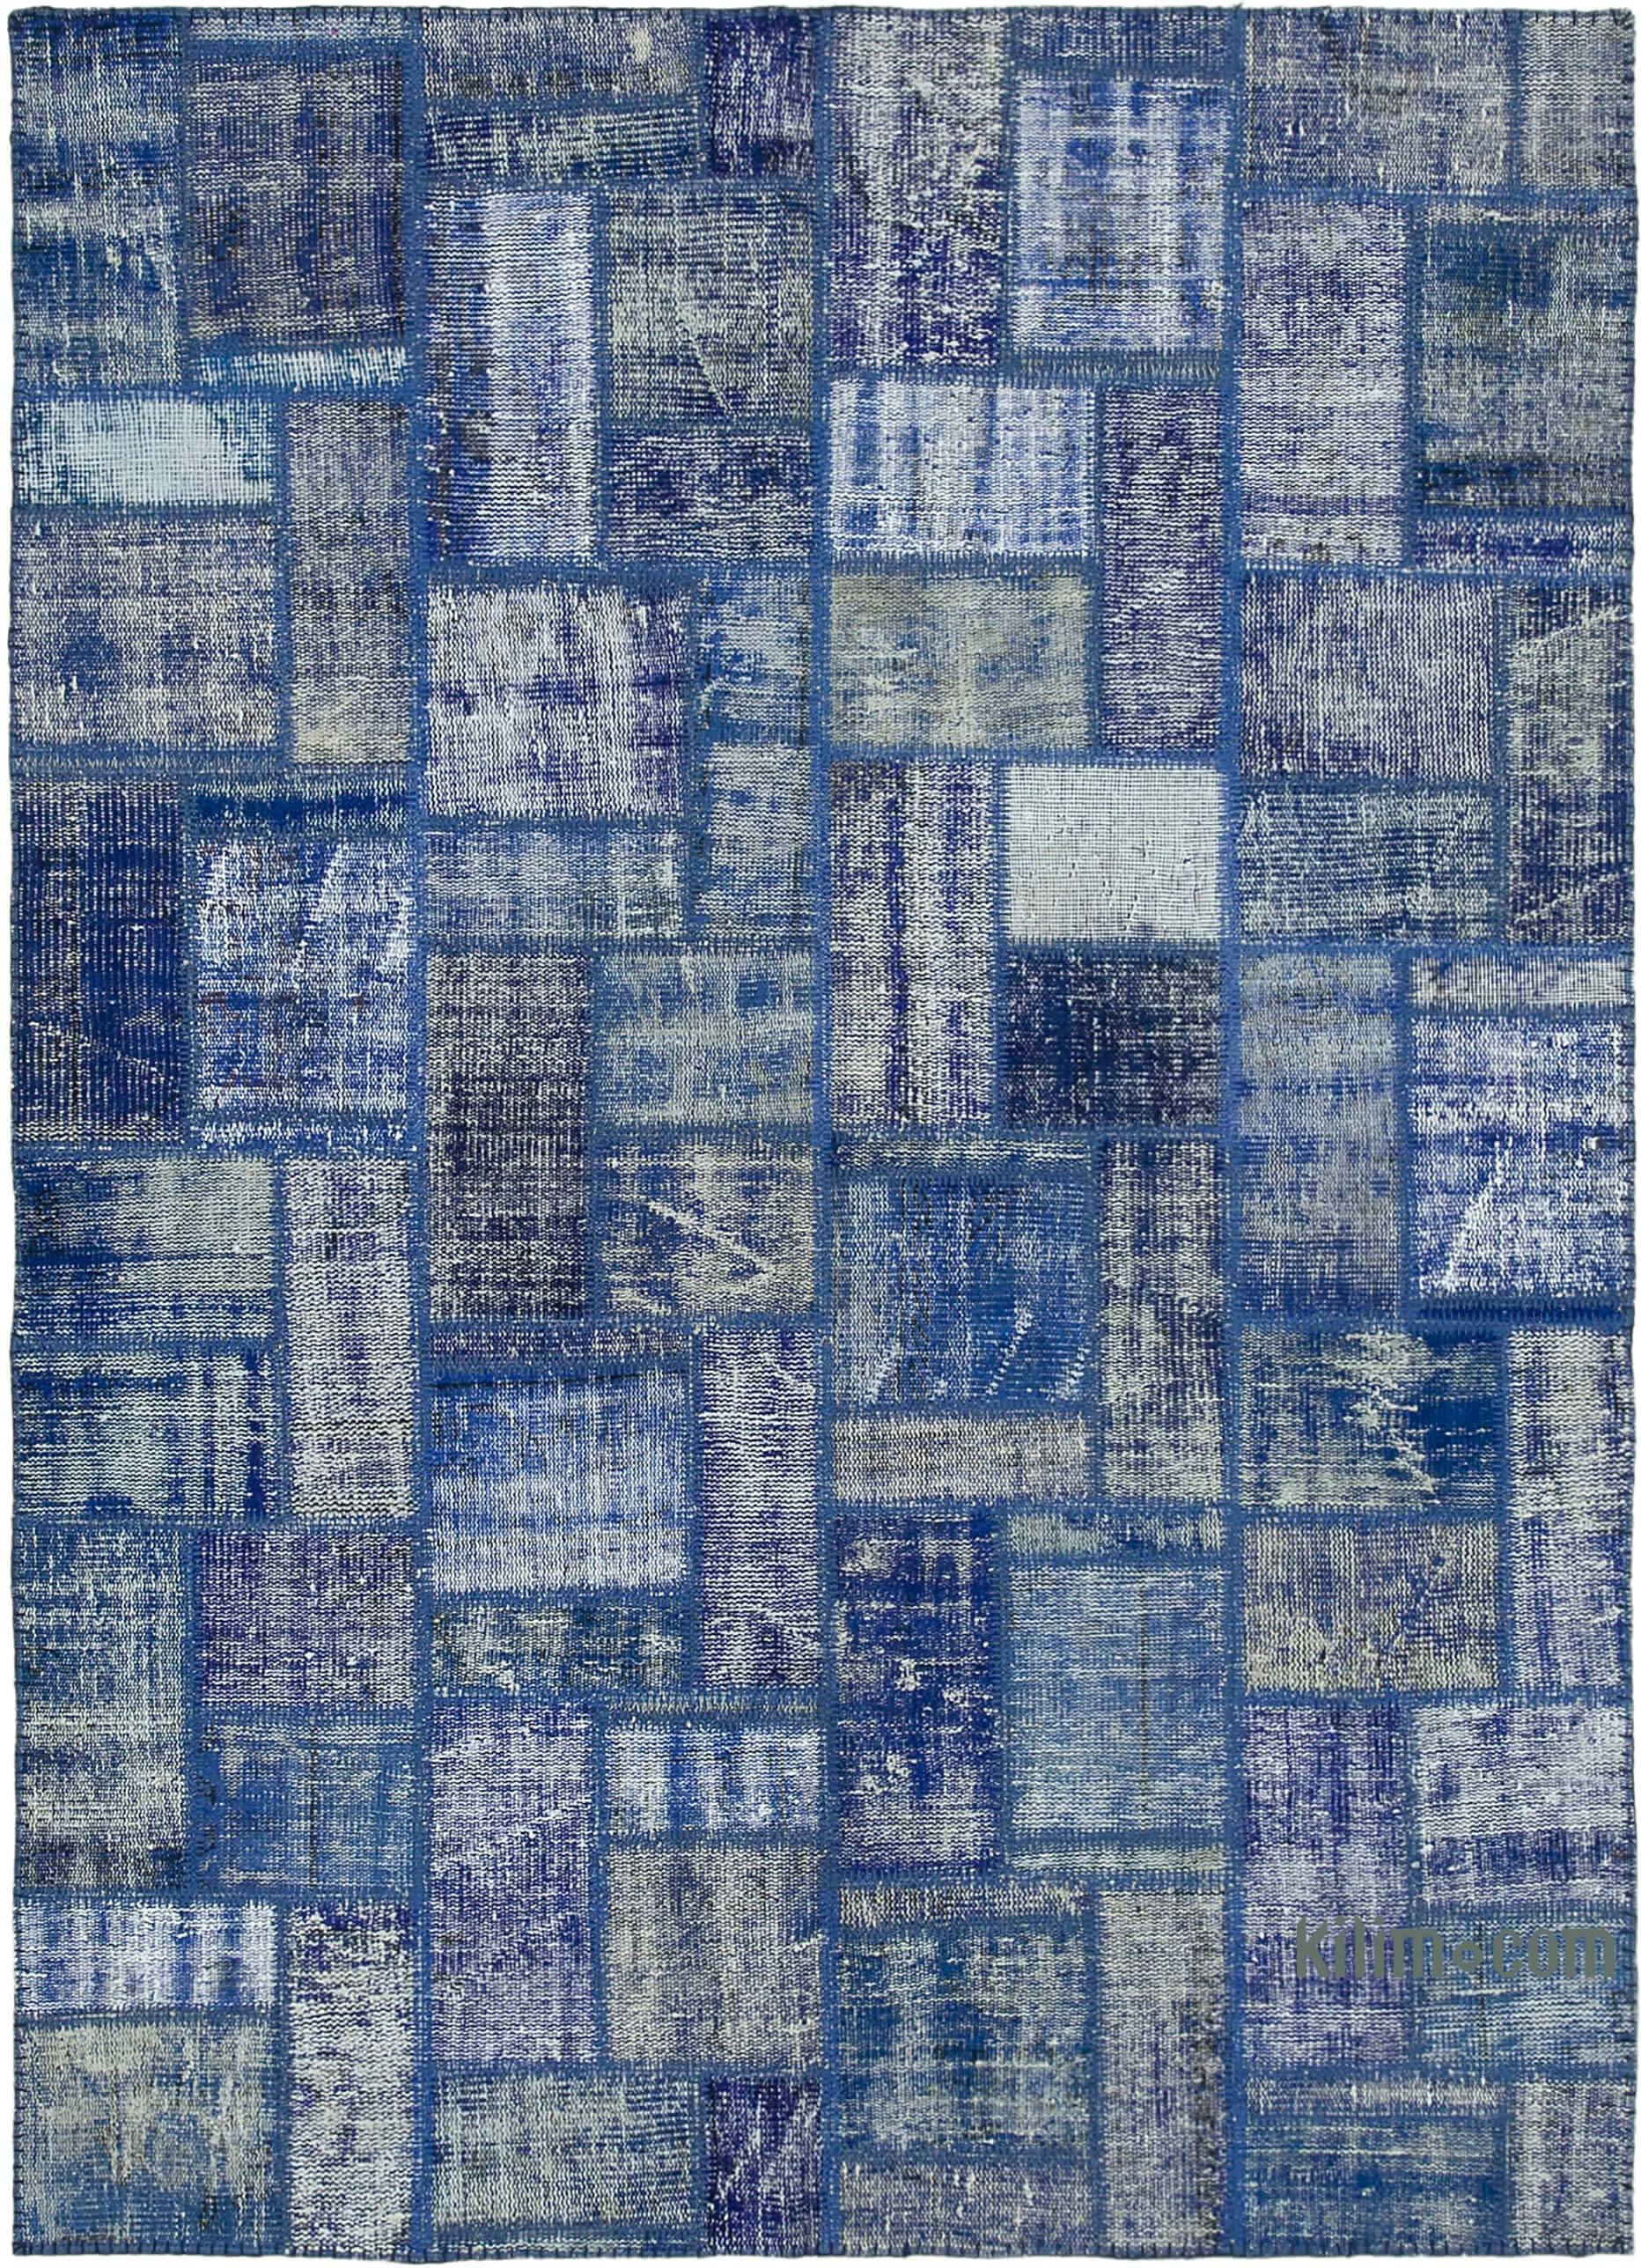 Shop Modern Rugs, Contemporary Carpets and Runners - Handwoven, Authentic